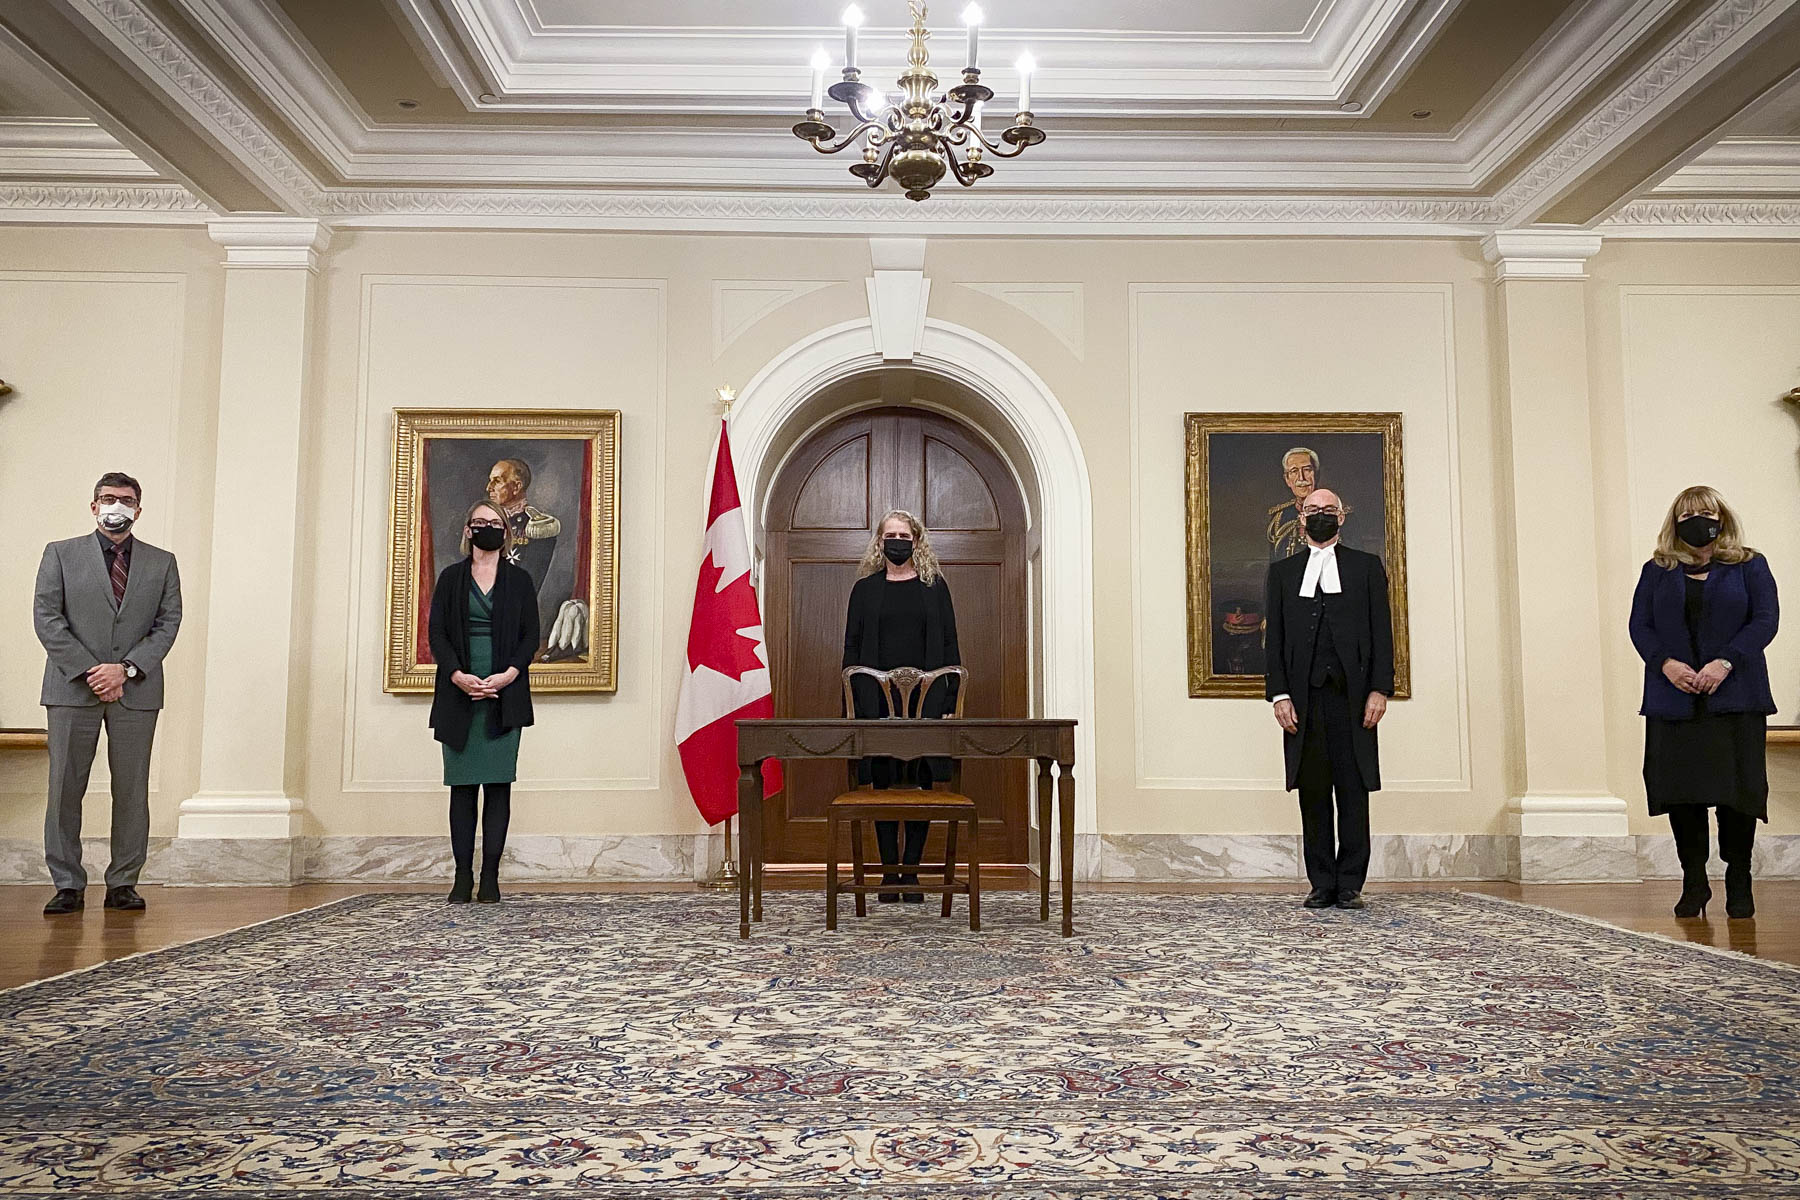 Royal Assent for Bill C-9: An Act to amend the Income Tax Act | The Governor General of Canada